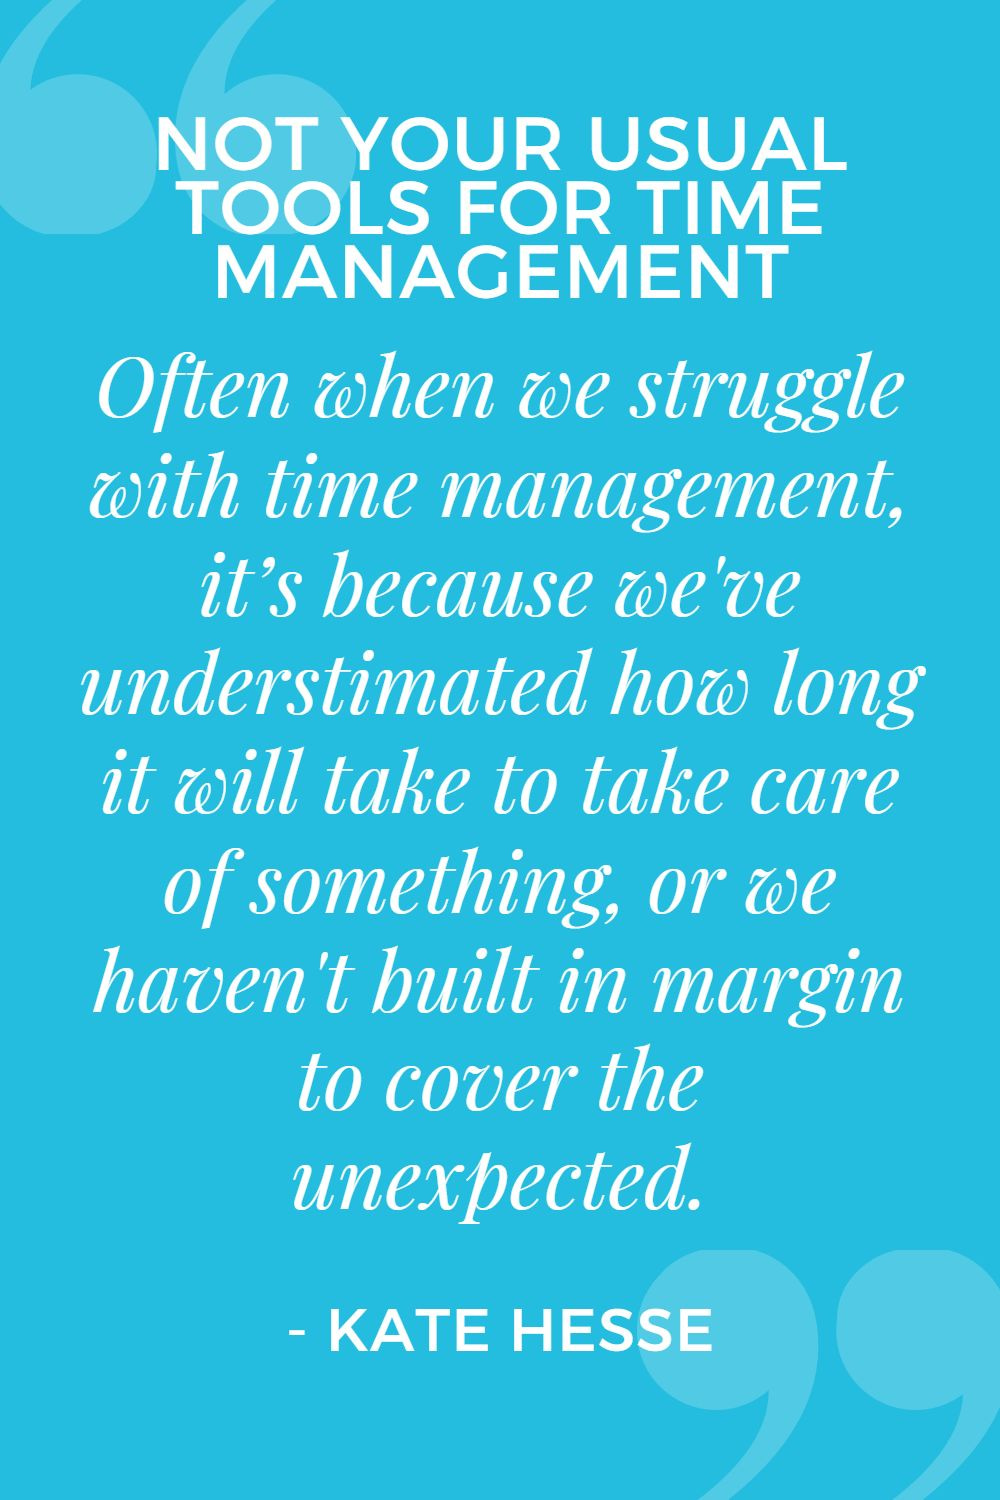 Often when we struggle with time management, it's because we've underestimated how long it will take to take care of something, or we haven't built in margin to cover the unexpected.